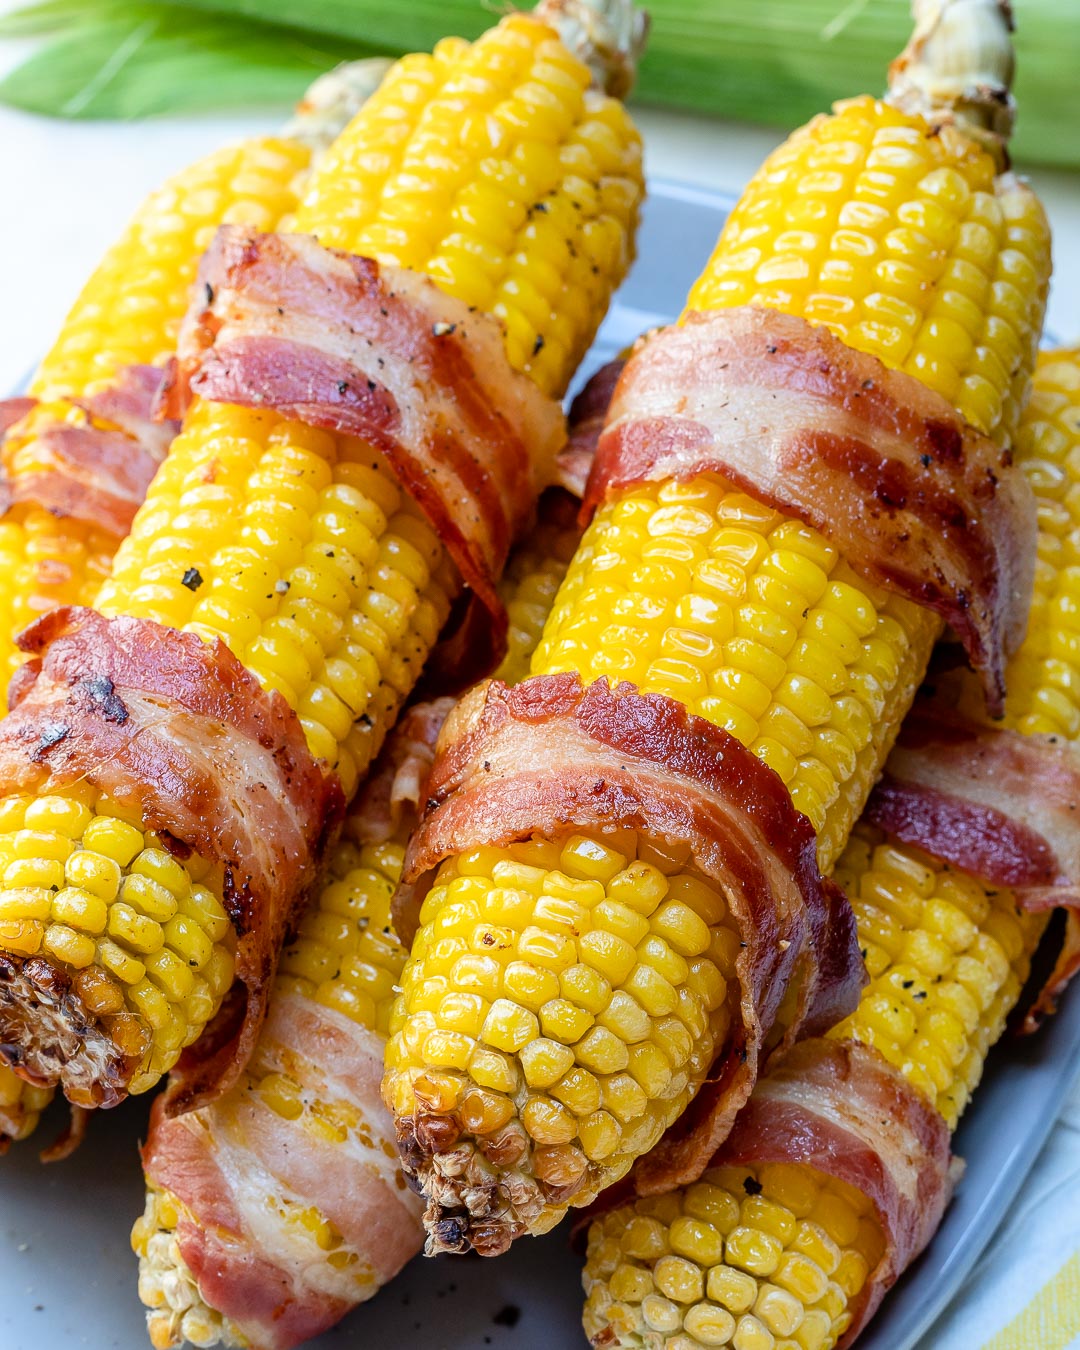 Bacon Wrapped Corn for Summertime Fun